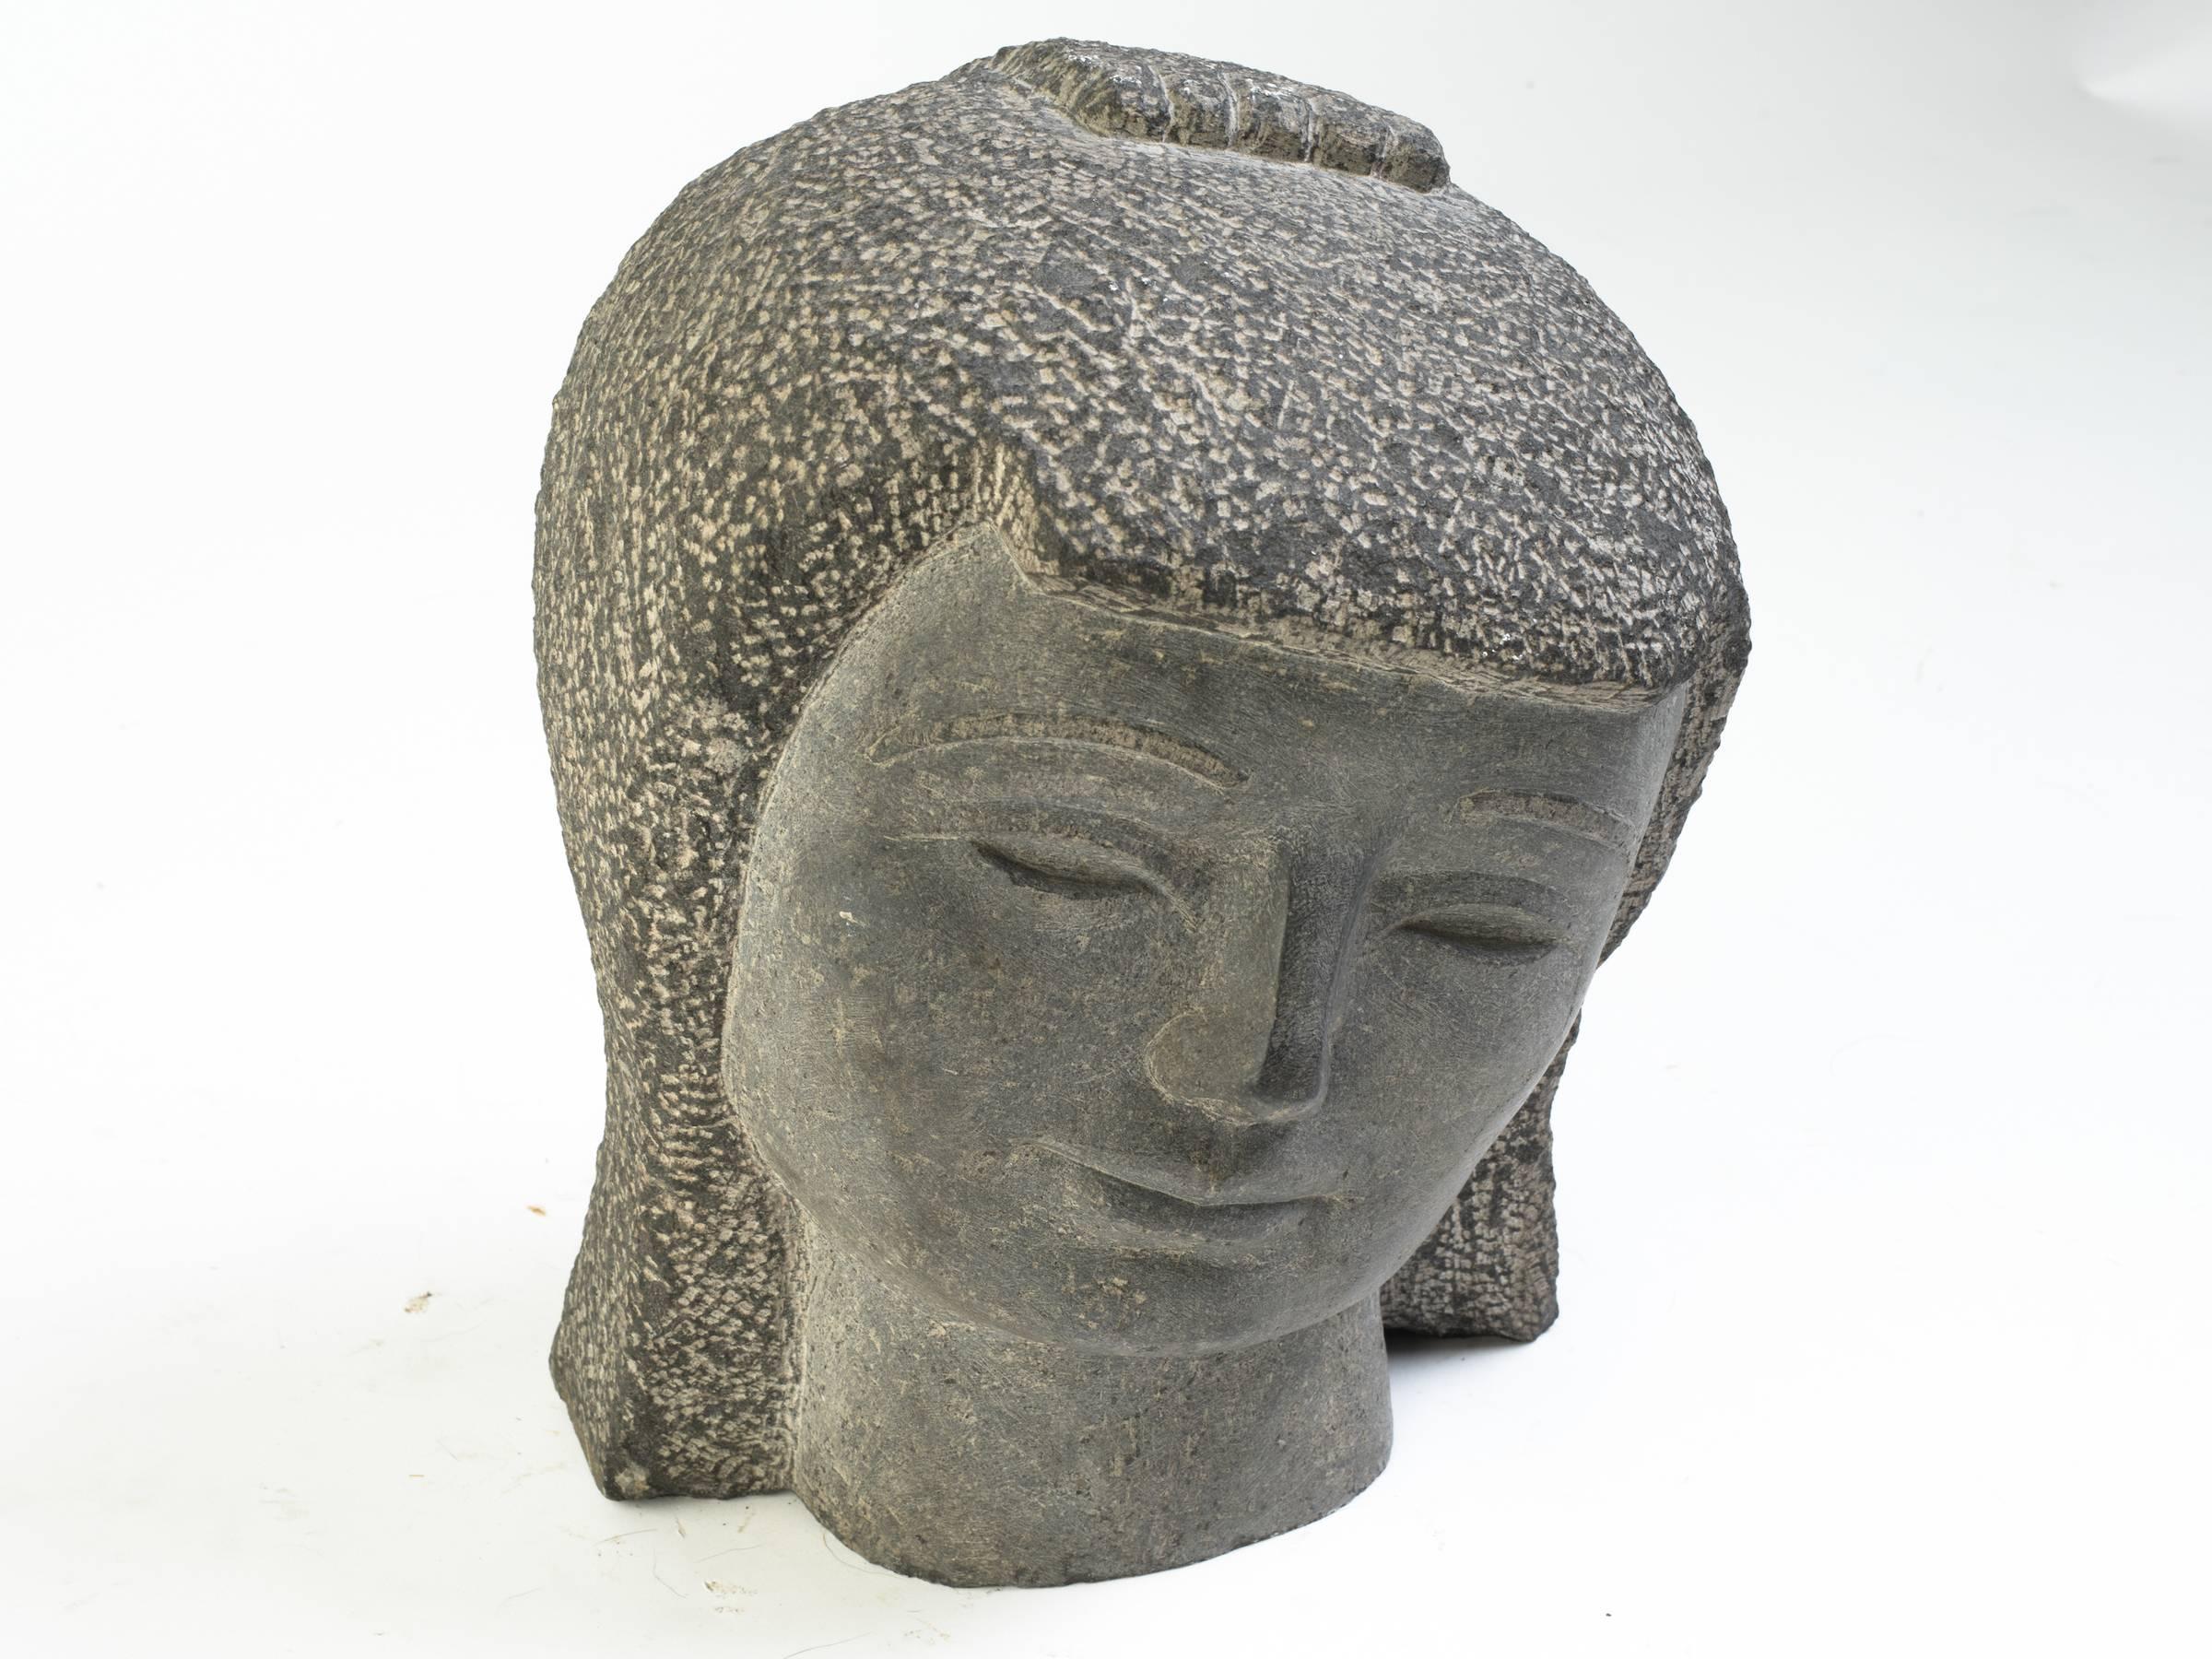 Carved stone Kwan Yin head from a Manhattan penthouse. Carved in Thailand from a solid piece of stone.